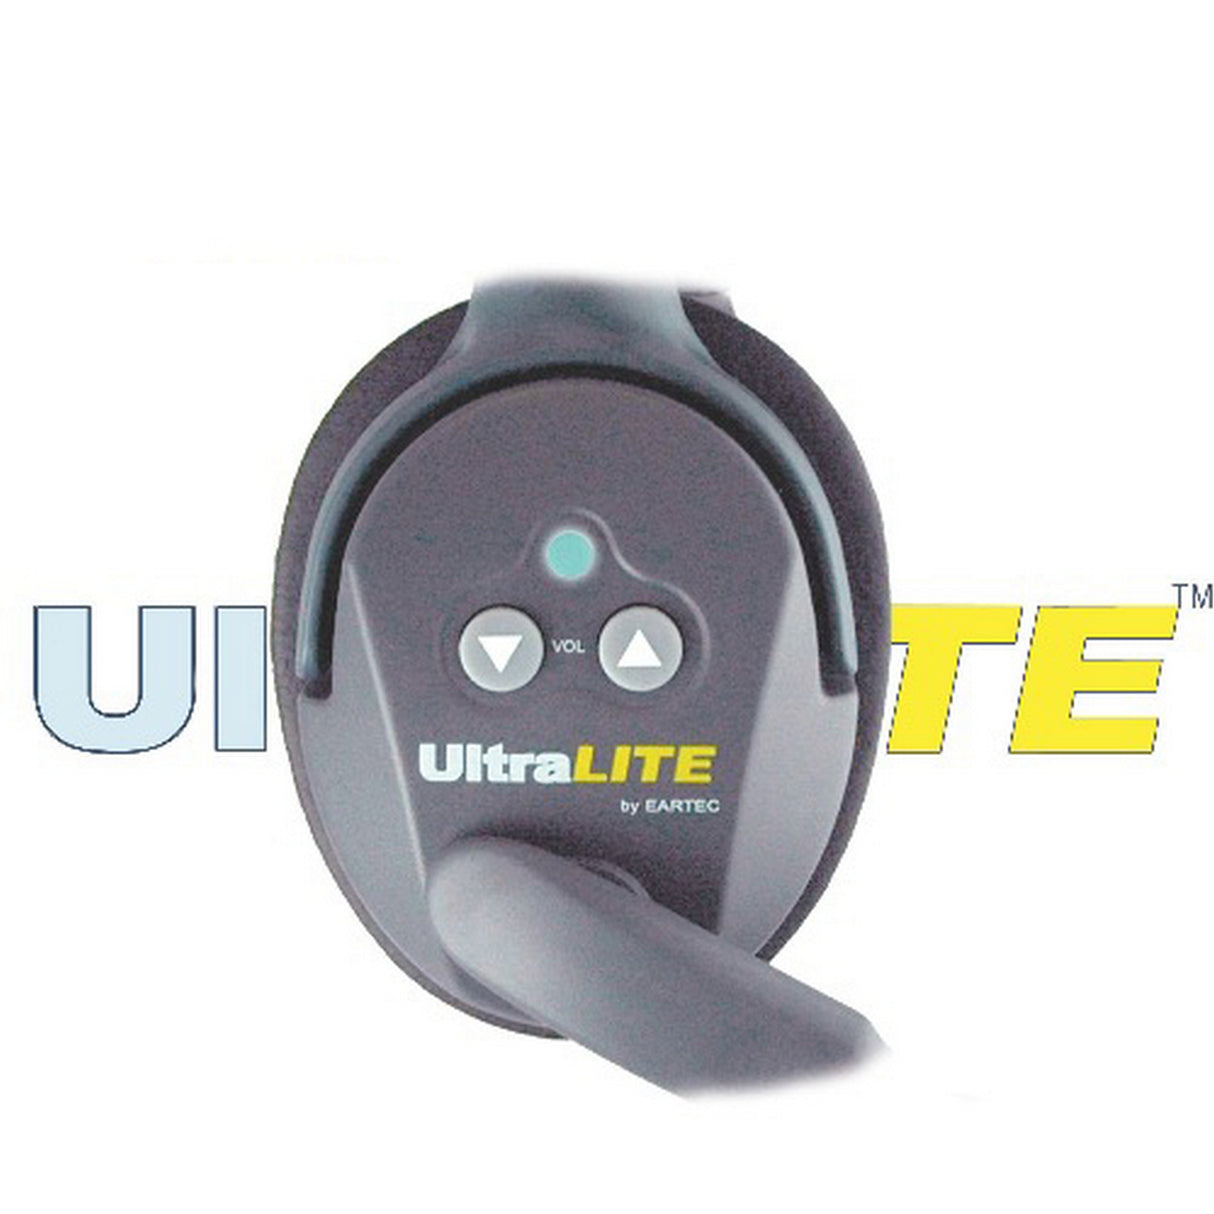 Eartec UltraLITE and HUB | 7 Person System 6 Single 1 Cyber Headset